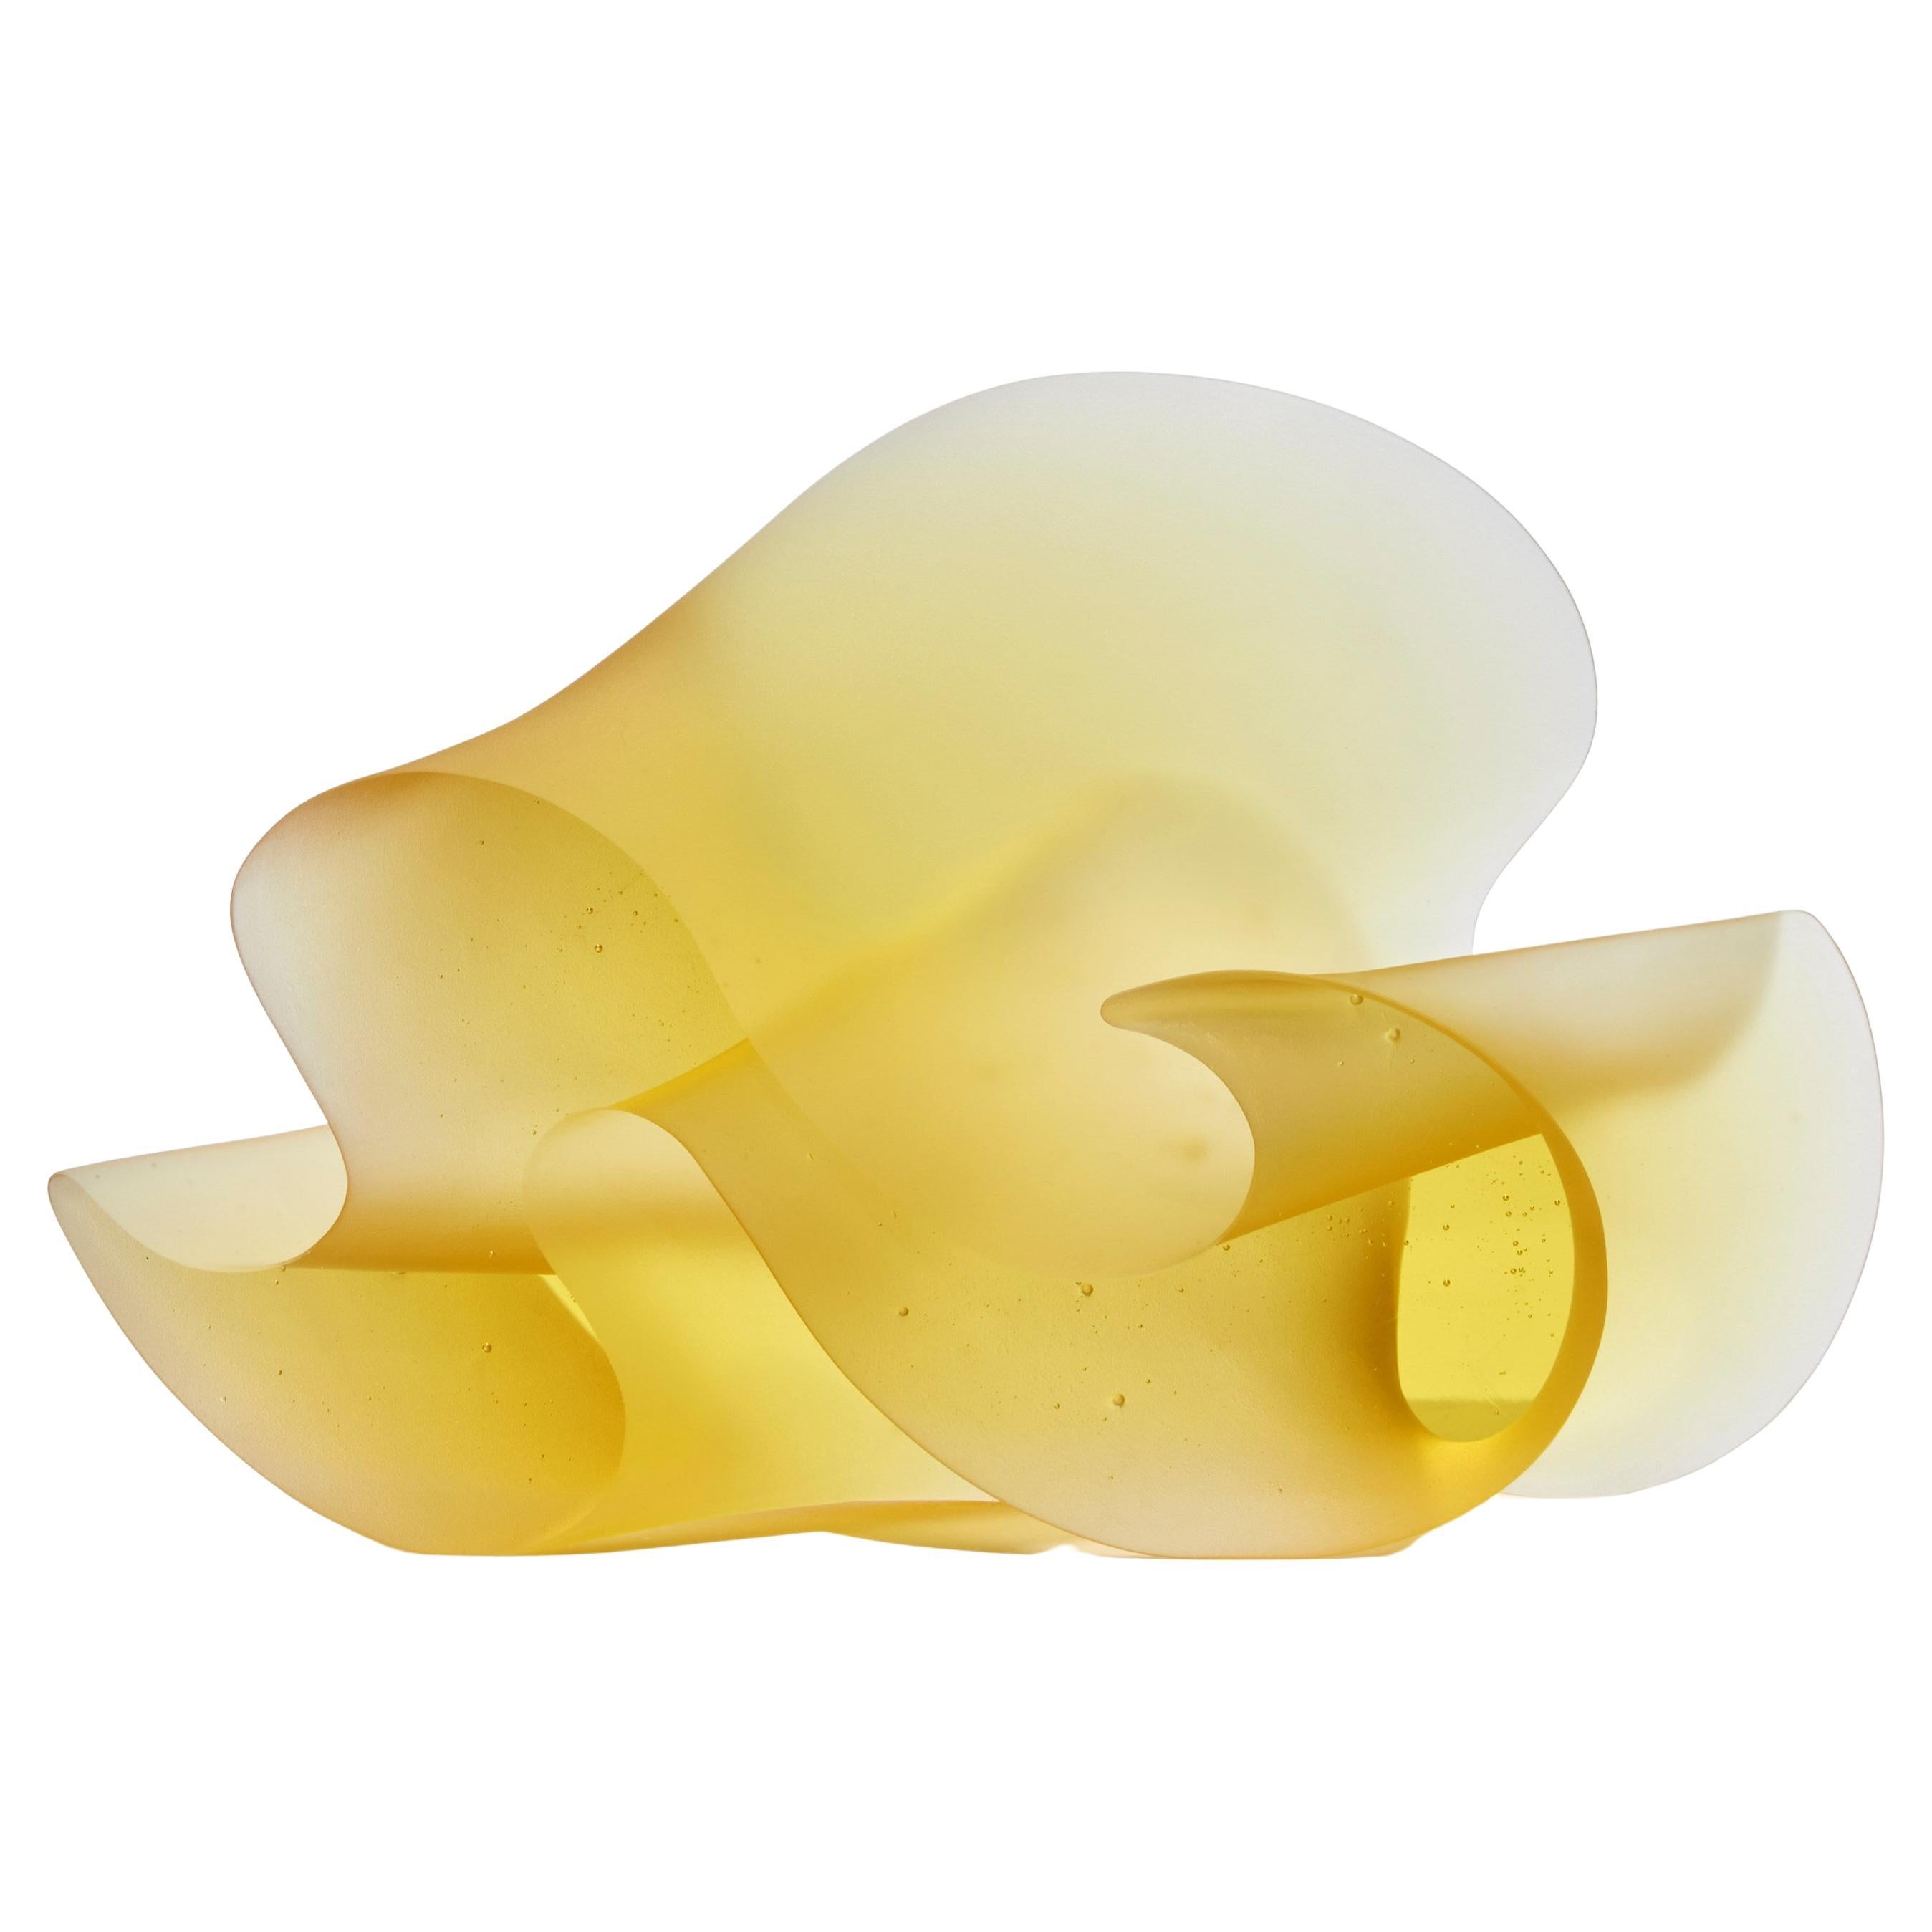 Flow Yellow, a Bright Gold / Yellow Solid Cast Glass Sculpture by Karin Mørch